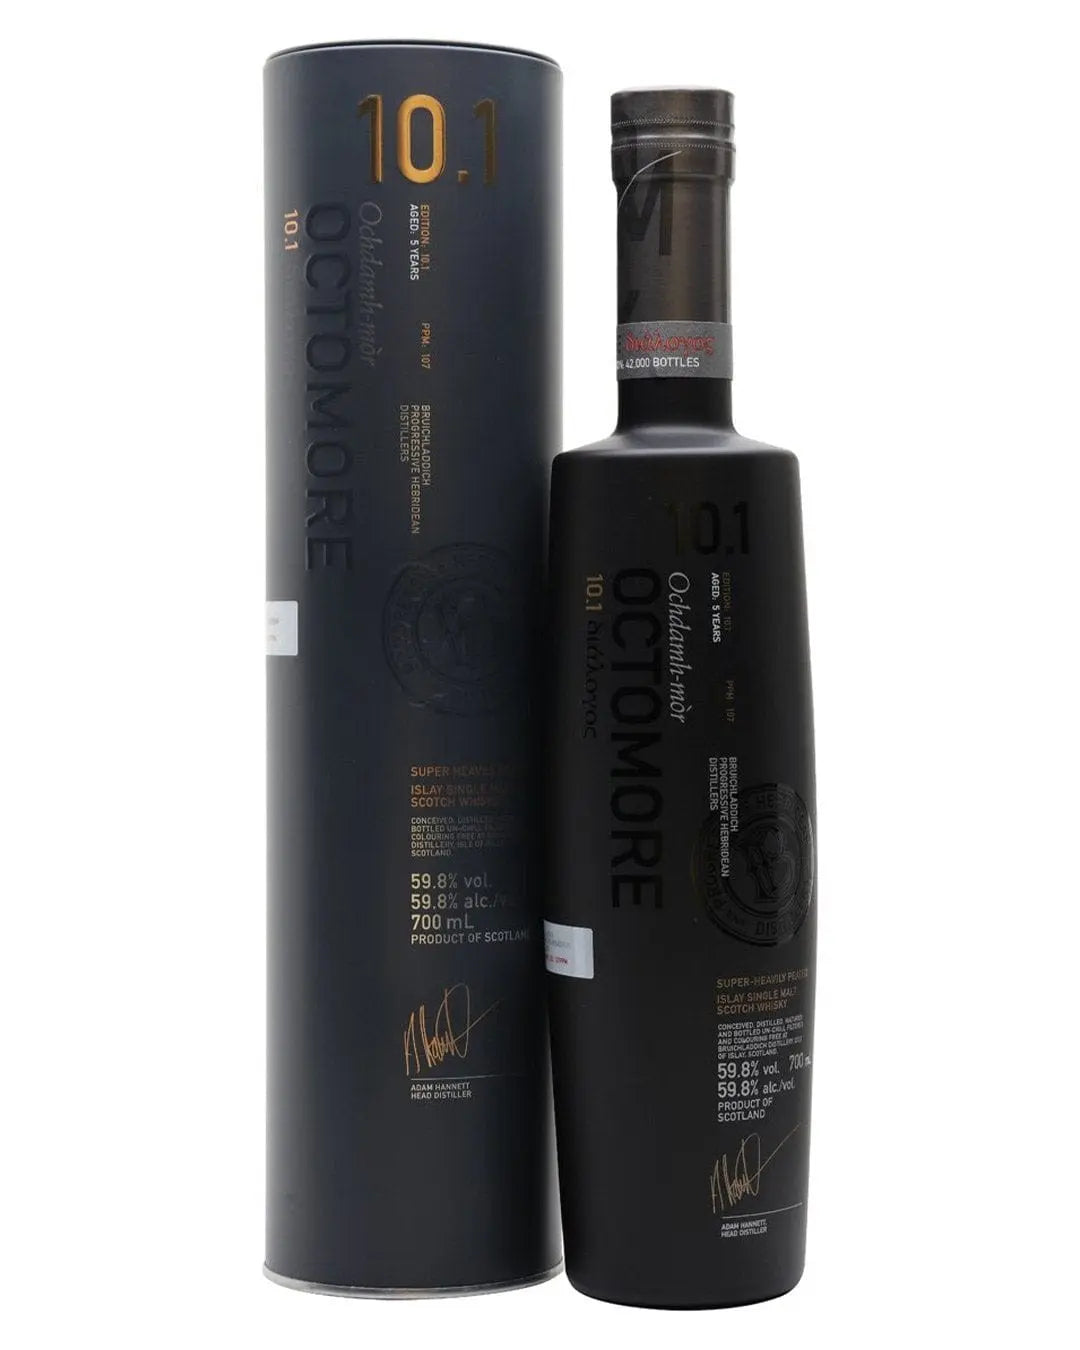 Bruichladdich Octomore 10.1 Whisky, 70 cl Whisky 5055807412223